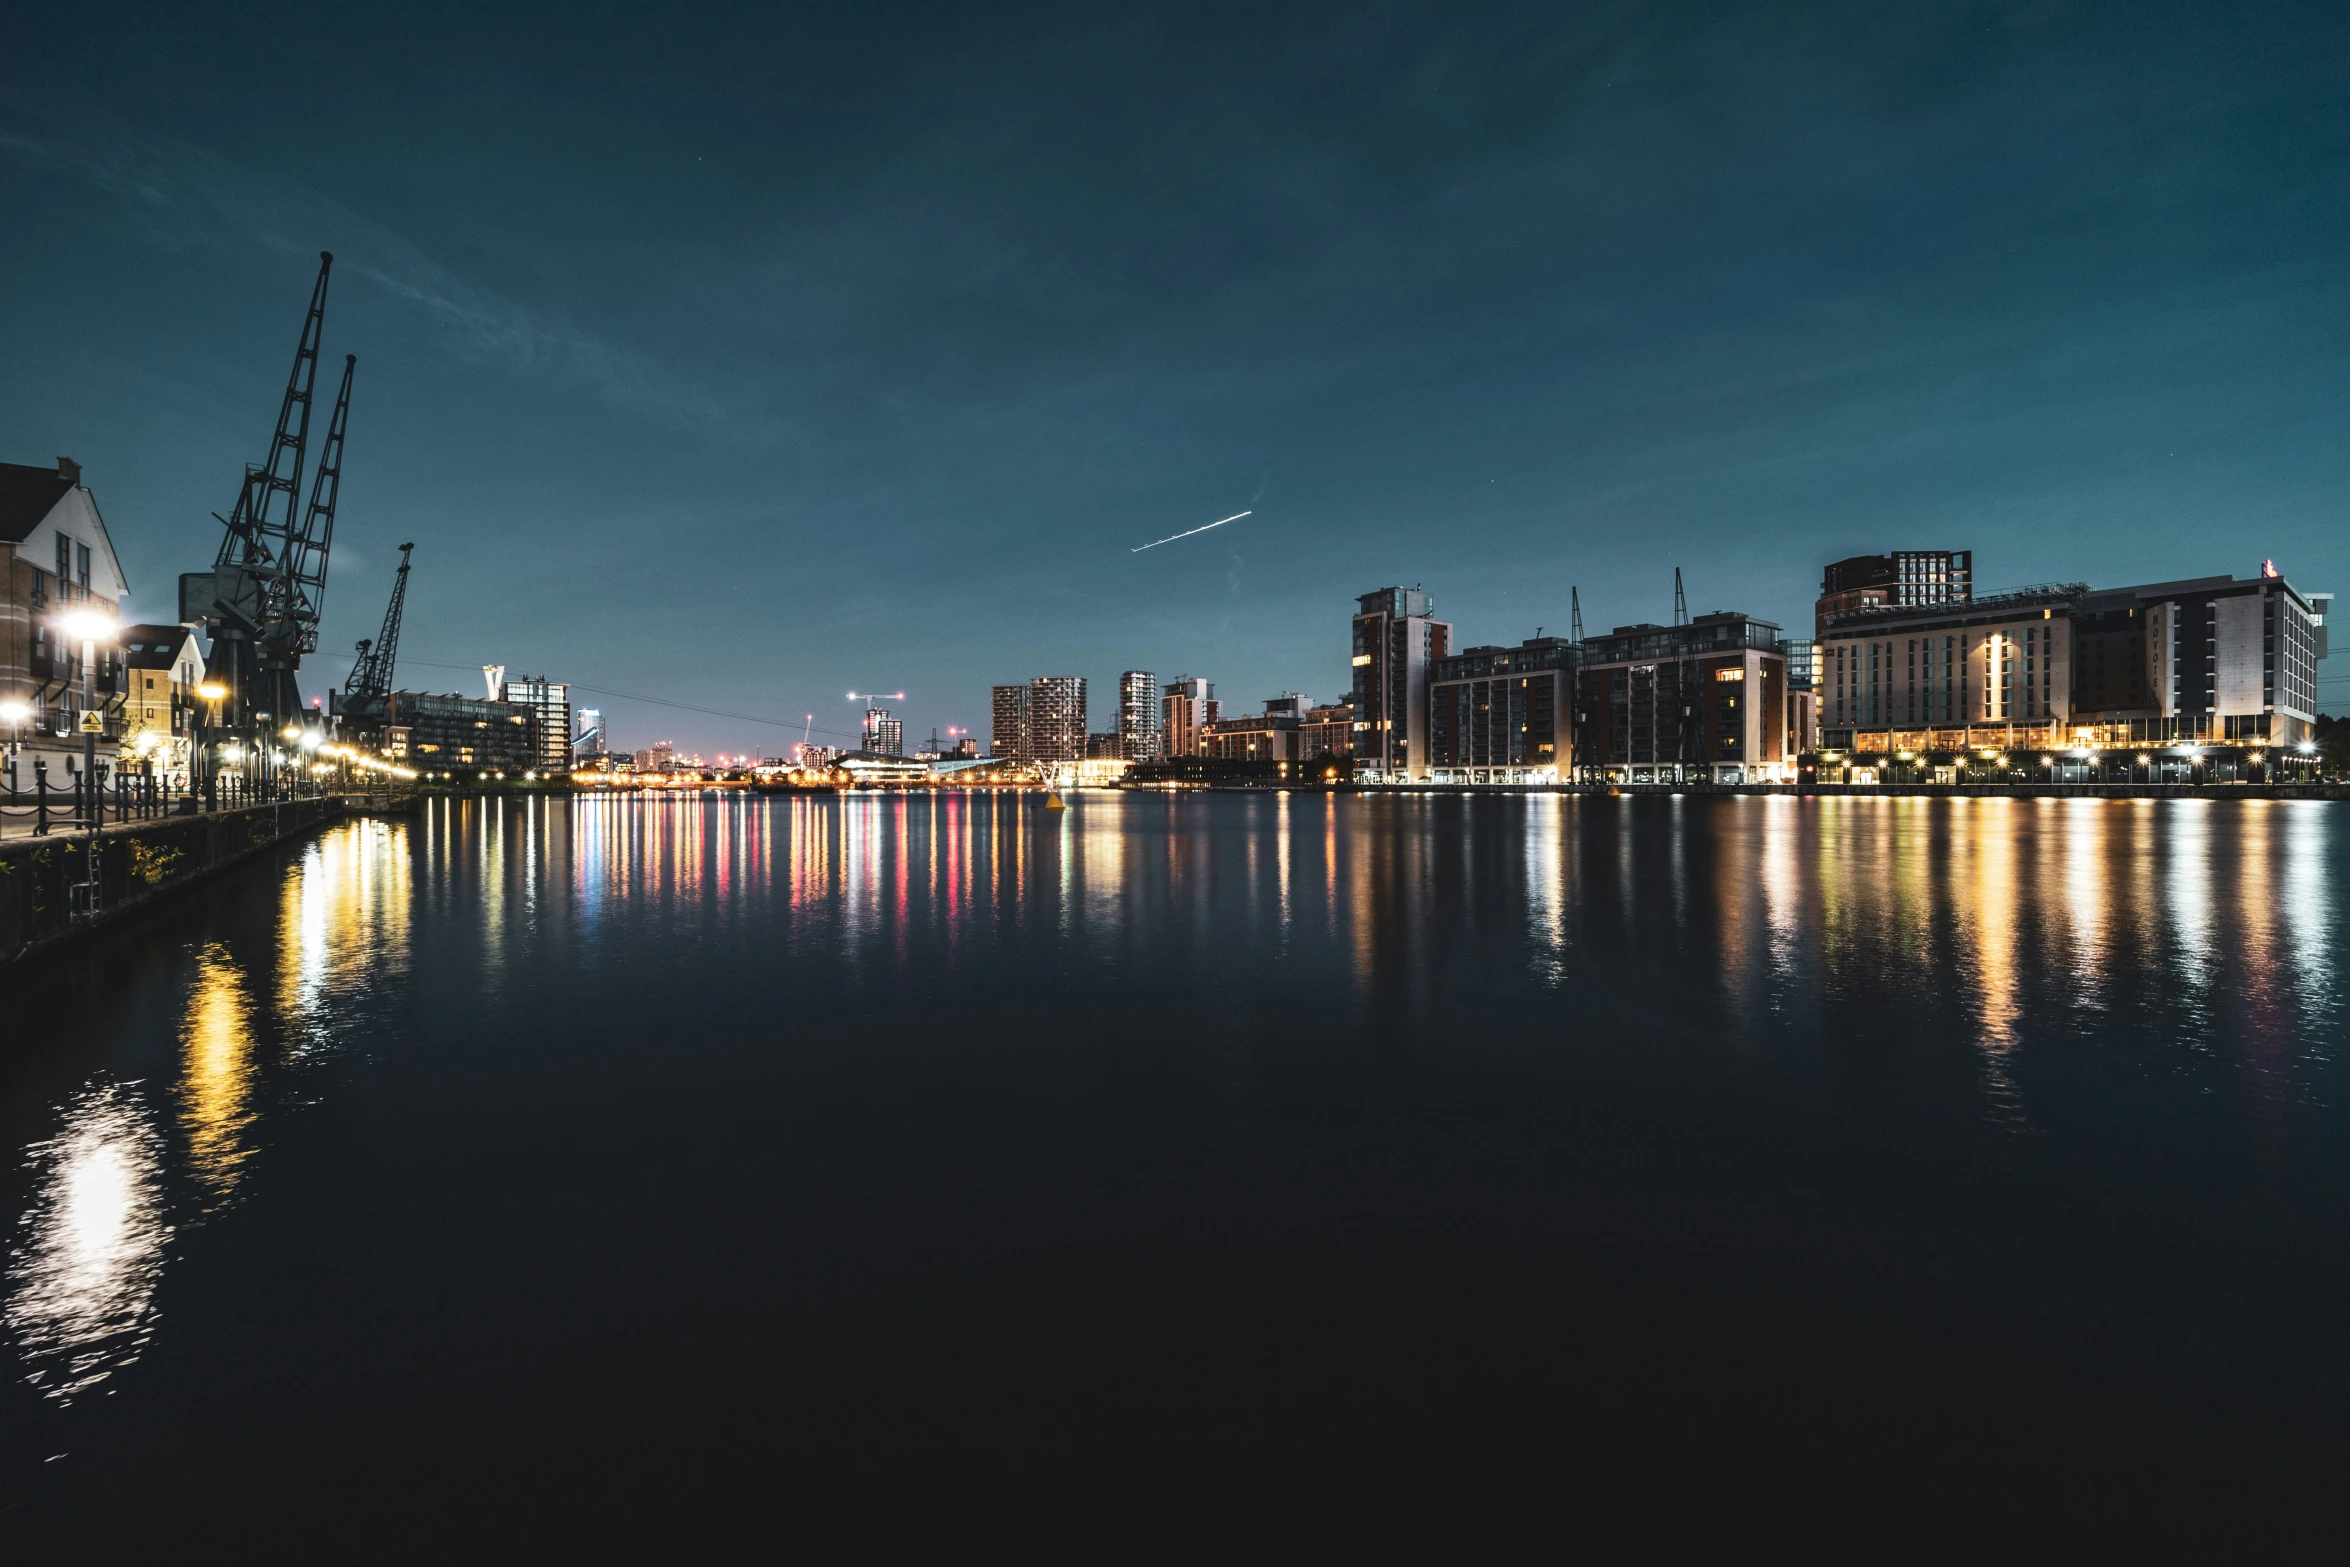 an image of a city with water and lights on